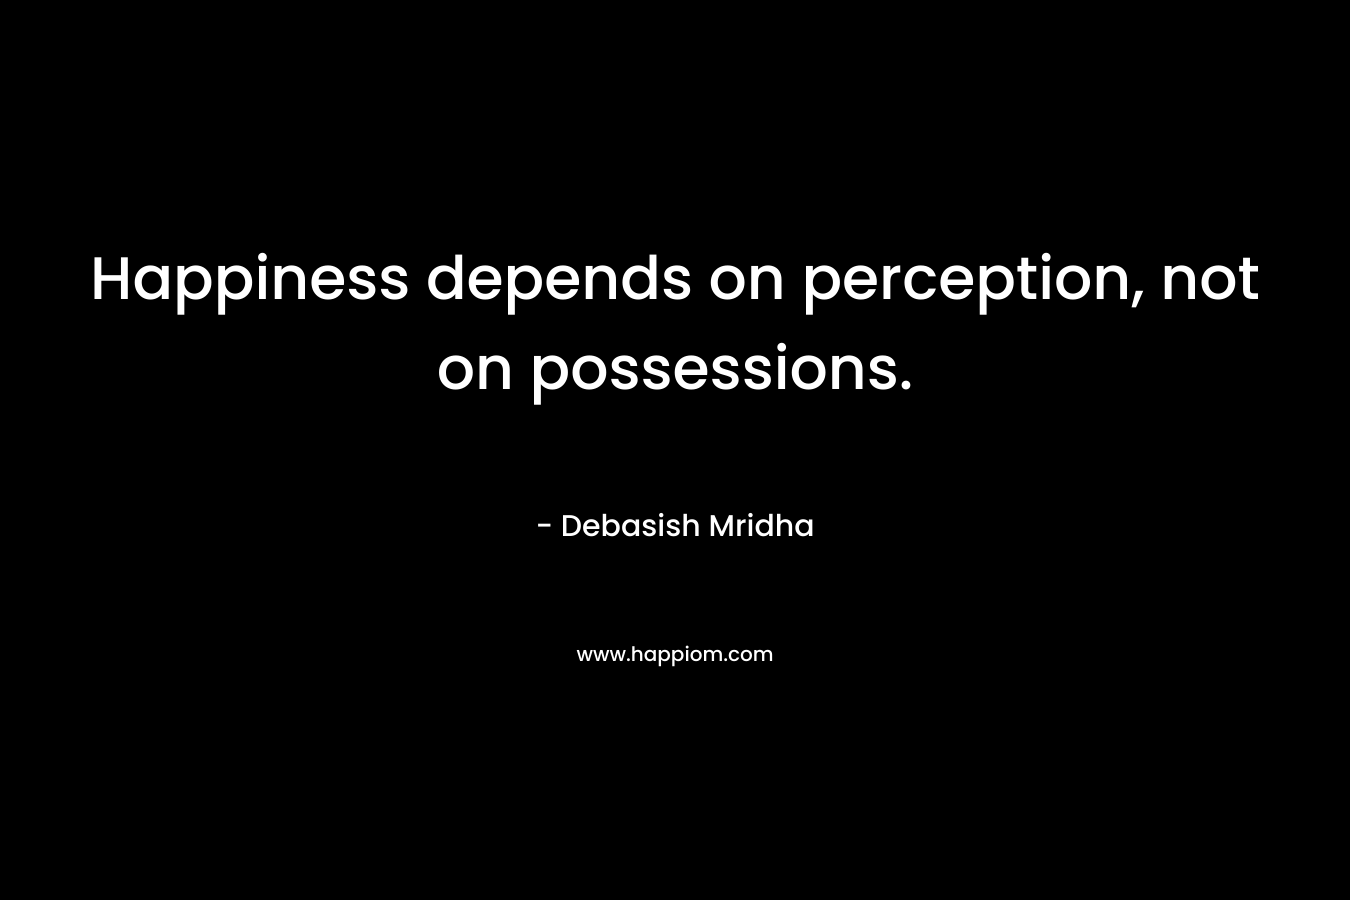 Happiness depends on perception, not on possessions.